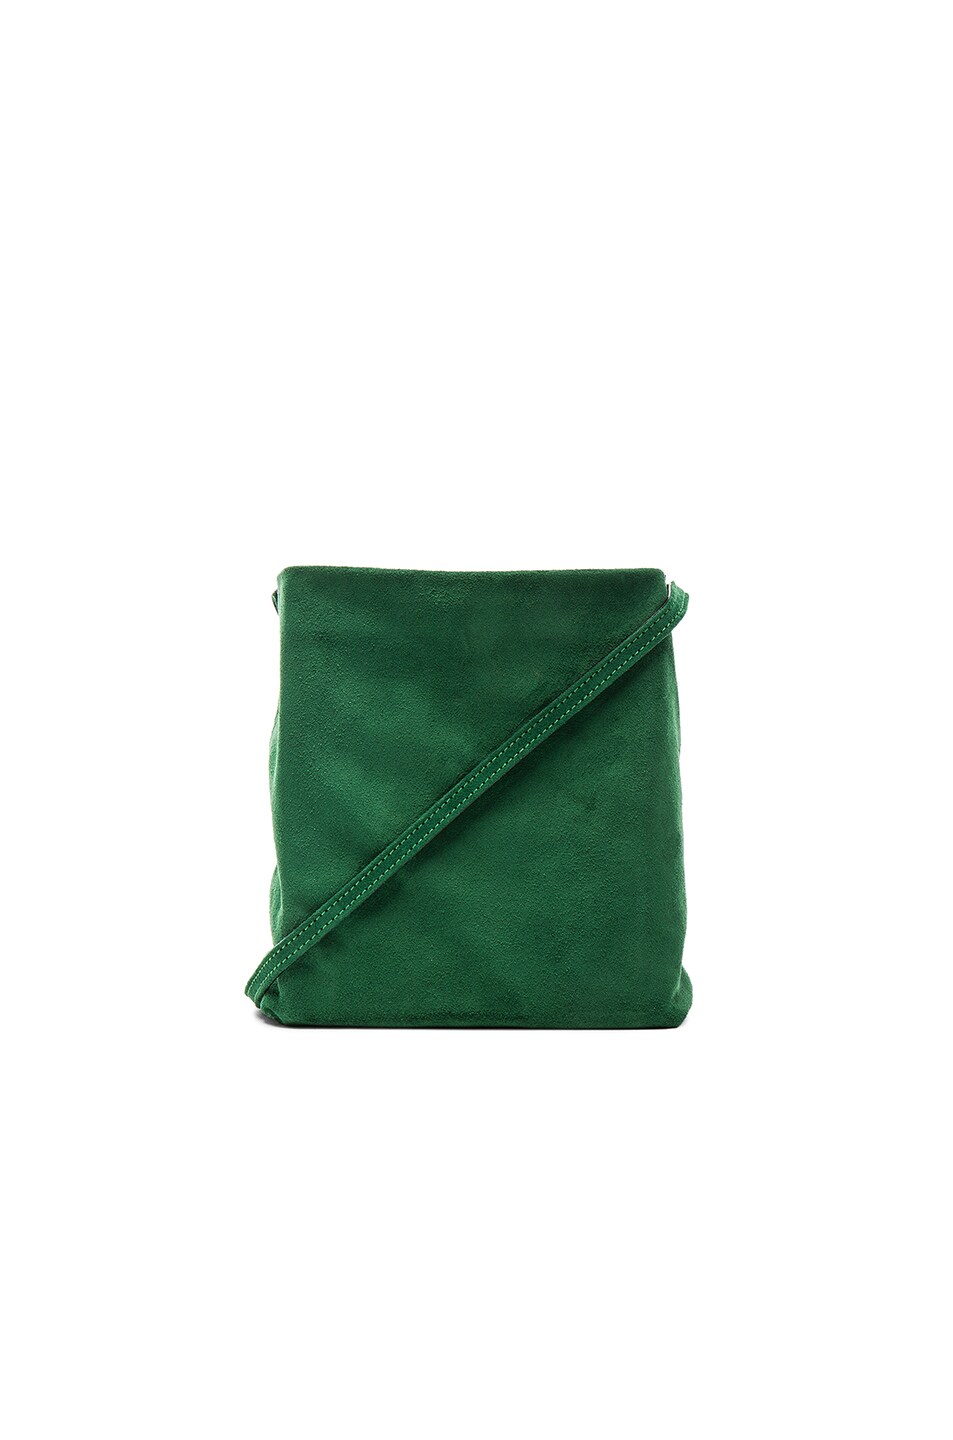 Image 1 of Ann Demeulemeester Suede Satchel in Emerald